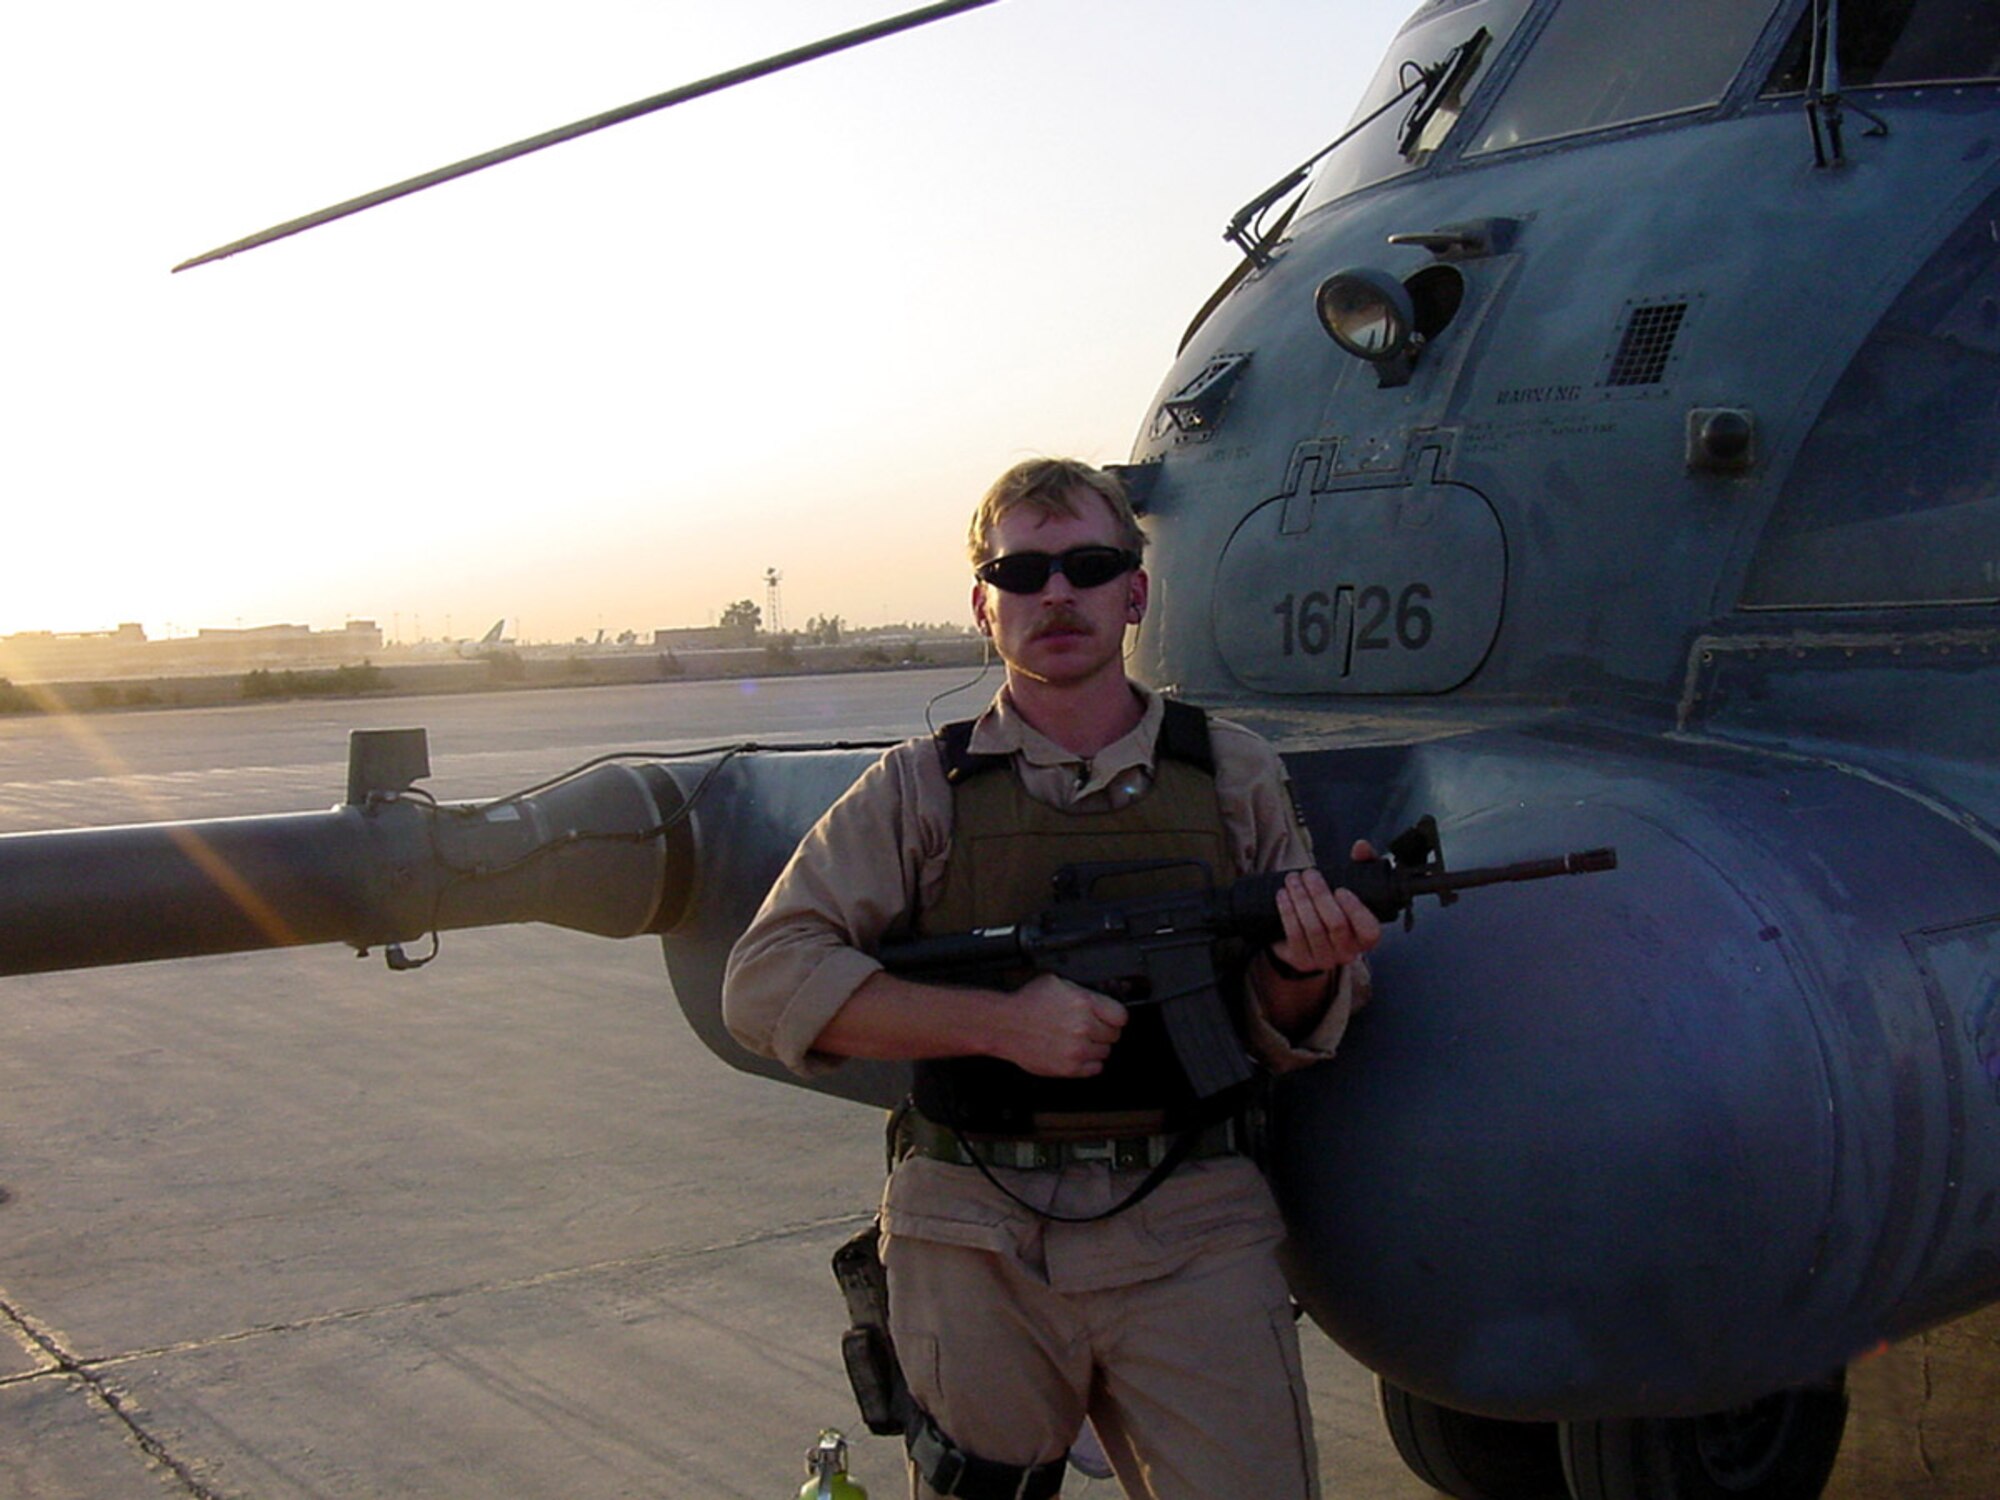 Tech. Sgt. Christian MacKenzie poses stands next to an Air Force special operations MH-53 Pave Low helicopter July 12, 2003, at Baghdad International Airport. Sergeant MacKenzie served as a flight engineer on the helicopter and flew low-level, long-range, undetected missions into enemy territory, day or night, in all kinds of weather, to insert, extract and resupply special operations forces. (Courtesy photo) 